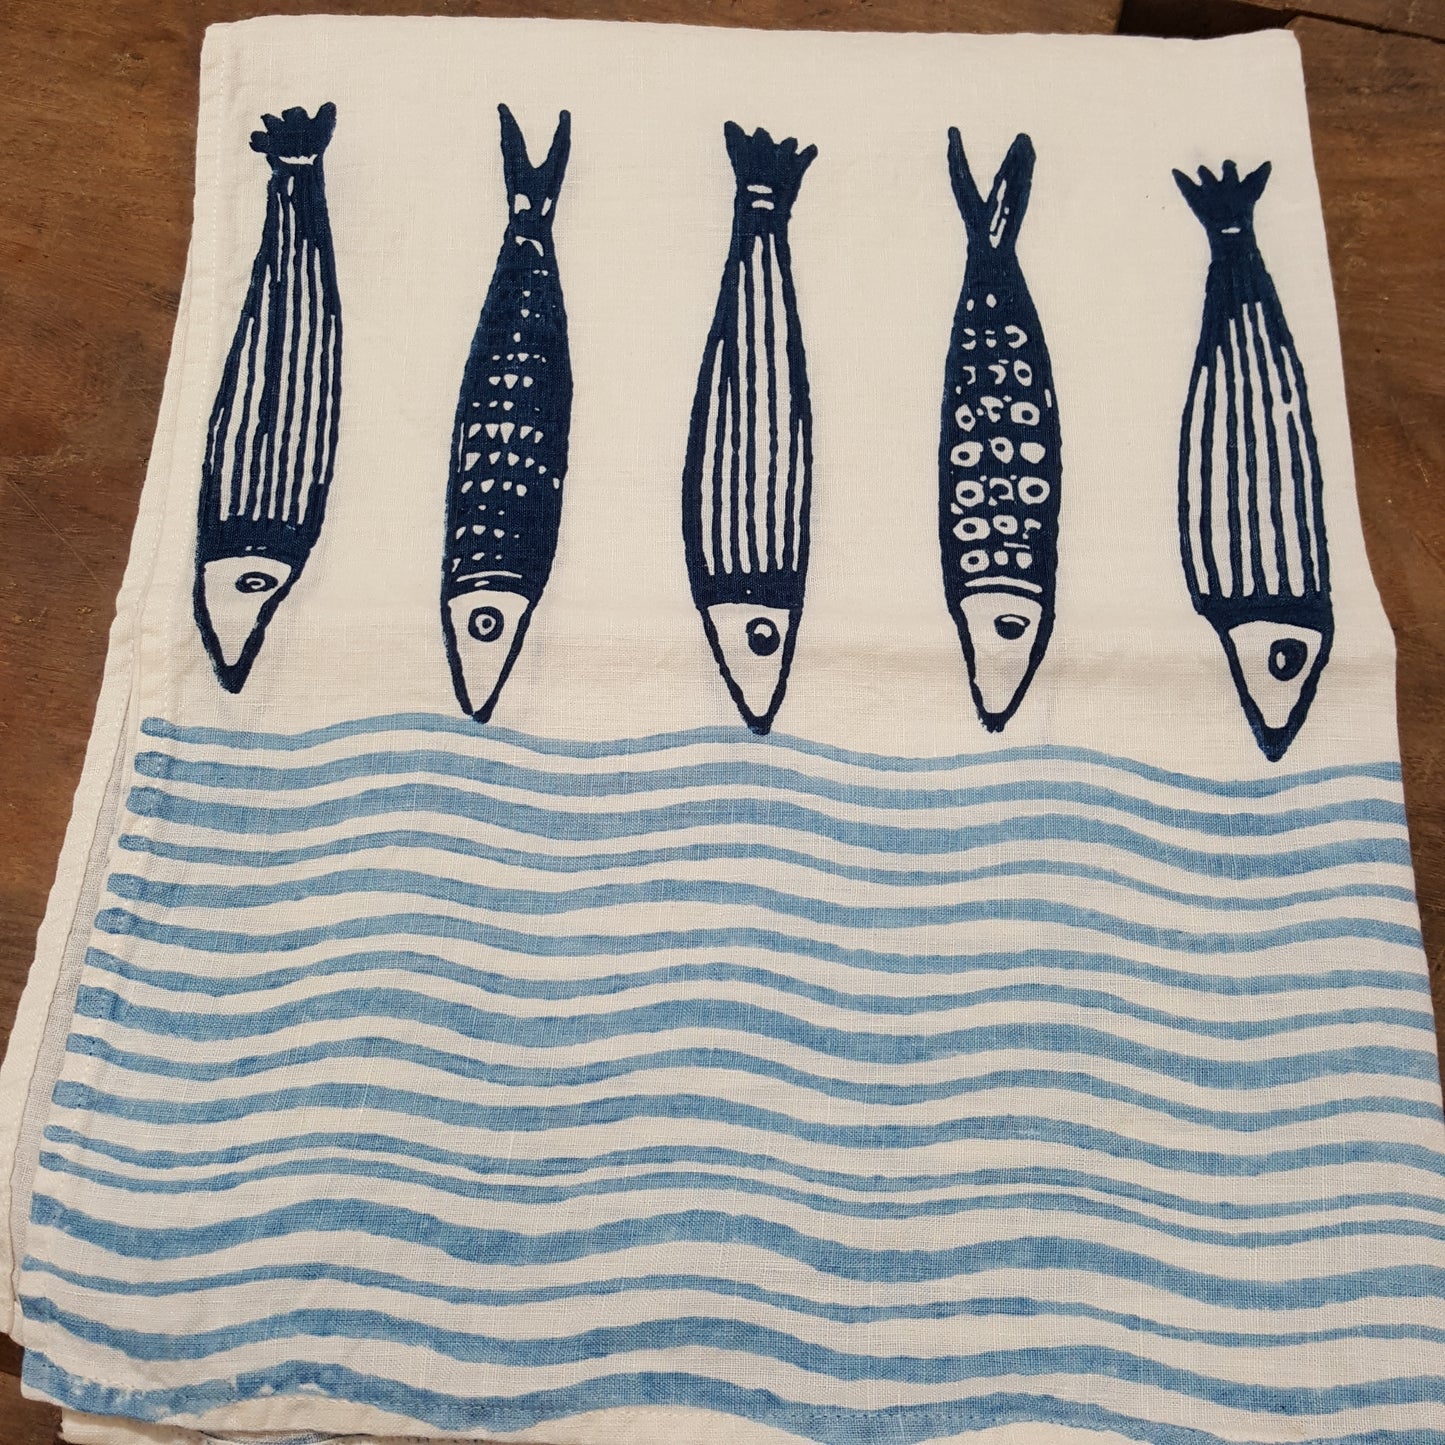 Tea towel with forks print in crumpled effect natural linen